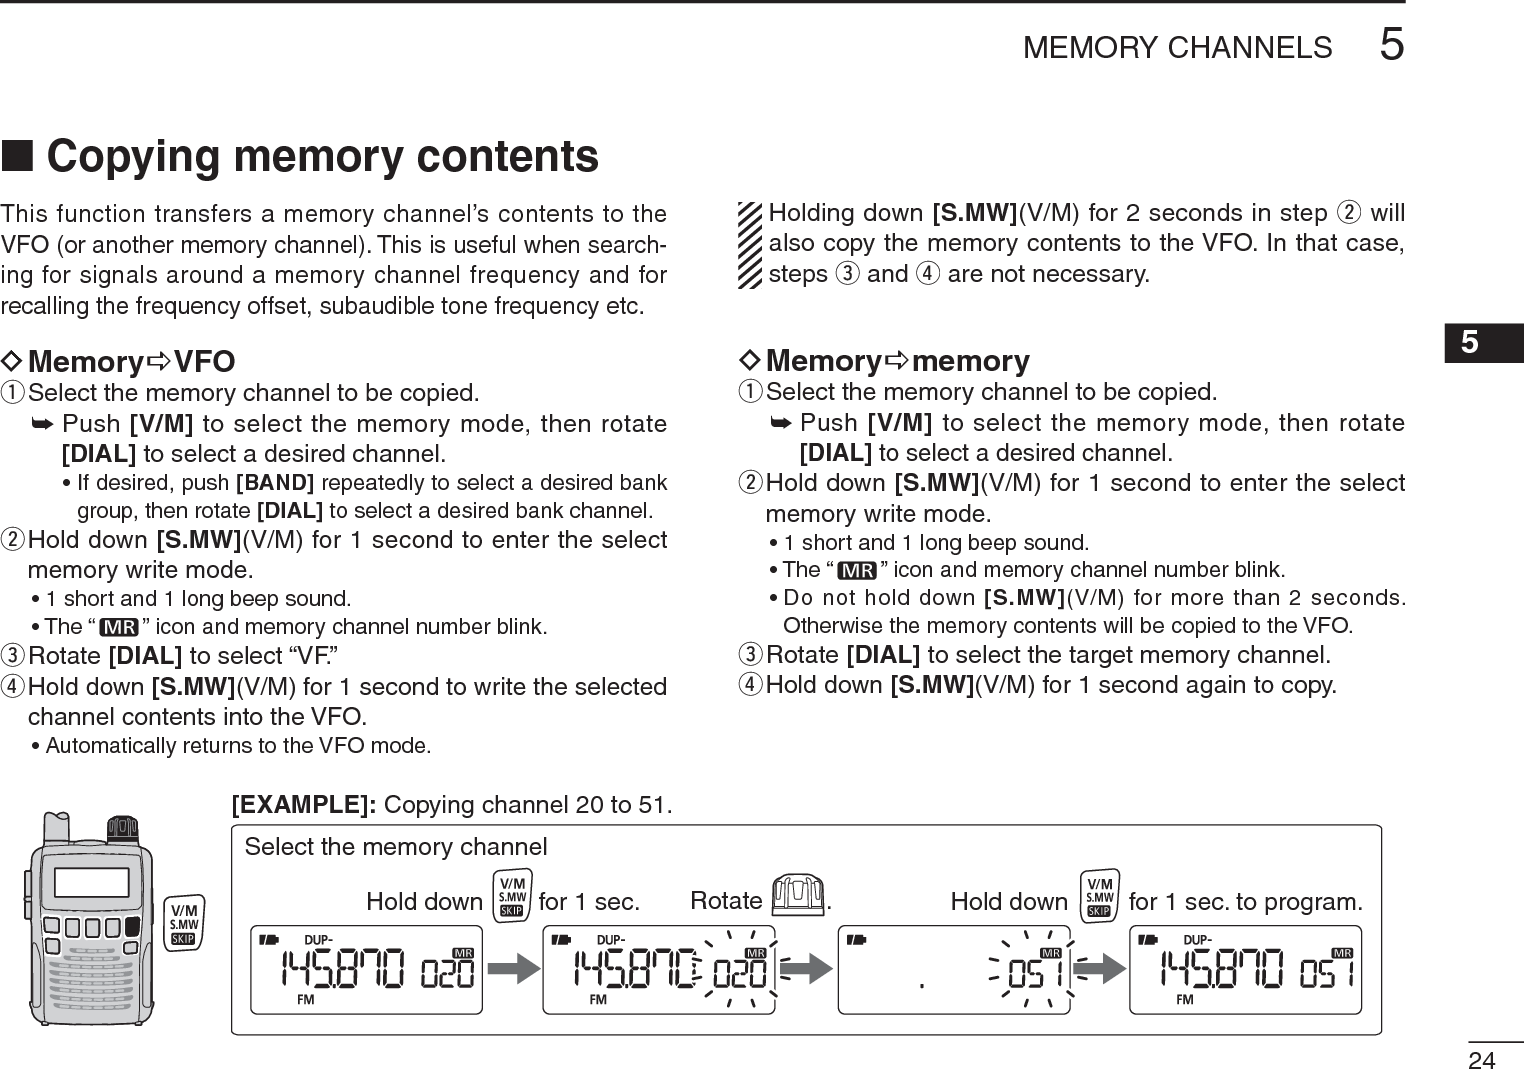 245MEMORY CHANNELS5NCopying memory contentsThis function transfers a memory channel’s contents to the VFO (or another memory channel). This is useful when search-ing for signals around a memory channel frequency and for recalling the frequency offset, subaudible tone frequency etc.DMemoryDVFOqSelect the memory channel to be copied.±Push [V/M] to select the memory mode, then rotate [DIAL] to select a desired channel.• If desired, push [BAND] repeatedly to select a desired bank group, then rotate [DIAL] to select a desired bank channel.w  Hold down [S.MW](V/M) for 1 second to enter the select memory write mode.• 1 short and 1 long beep sound.• The “ ” icon and memory channel number blink.eRotate [DIAL] to select “VF.” r  Hold down [S.MW](V/M) for 1 second to write the selected channel contents into the VFO.• Automatically returns to the VFO mode.Holding down [S.MW](V/M) for 2 seconds in step w will also copy the memory contents to the VFO. In that case, steps e and r are not necessary.DMemoryDmemoryqSelect the memory channel to be copied.±Push [V/M]to select the memory mode, then rotate [DIAL] to select a desired channel.w  Hold down [S.MW](V/M) for 1 second to enter the select memory write mode.• 1 short and 1 long beep sound.• The “ ” icon and memory channel number blink.• Do not hold down [S.MW](V/M) for more than 2 seconds. Otherwise the memory contents will be copied to the VFO.eRotate [DIAL] to select the target memory channel.r  Hold down [S.MW](V/M) for 1 second again to copy.Rotate .Hold down for 1 sec. Hold down for 1 sec. to program.Select the memory channel[EXAMPLE]: Copying channel 20 to 51.